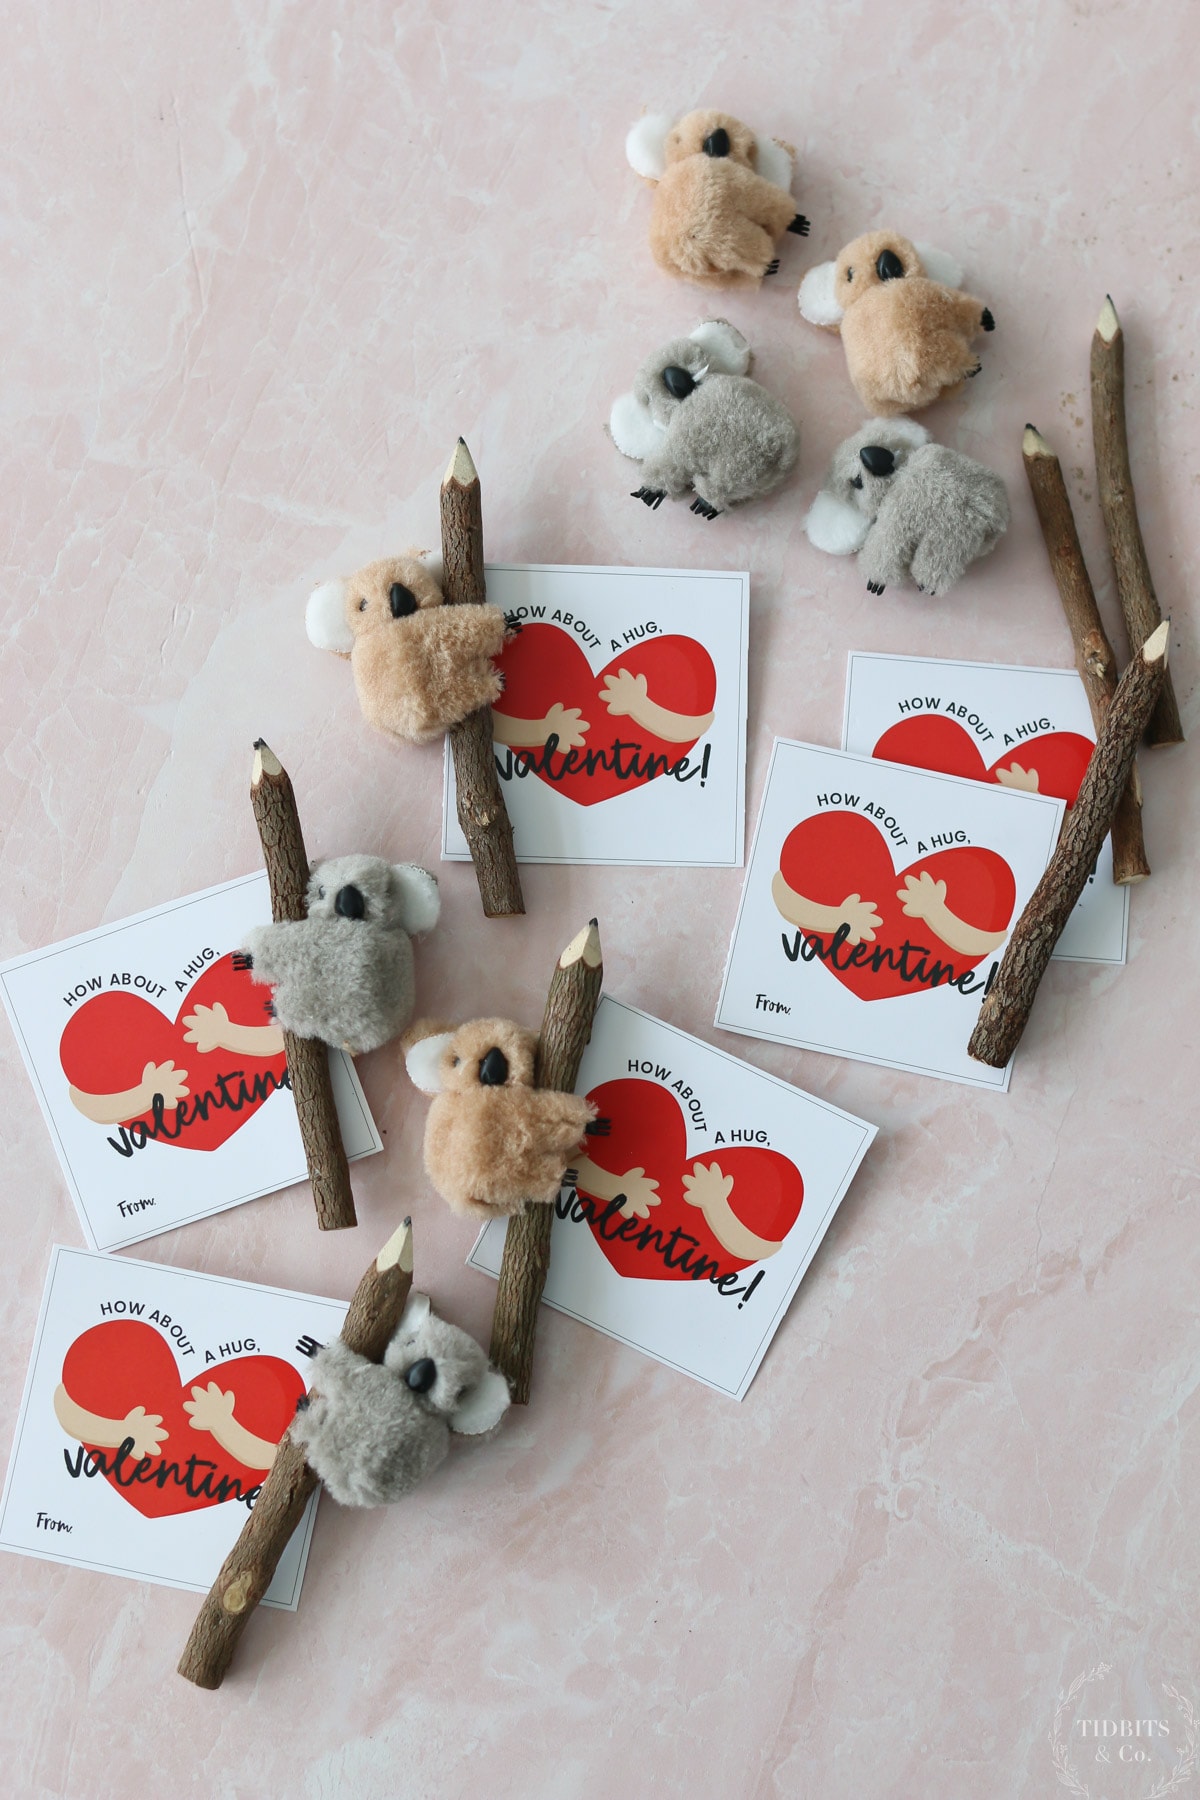 "How about a hug, Valentine!"  free printable valentines cards and koala bears attached to pencils